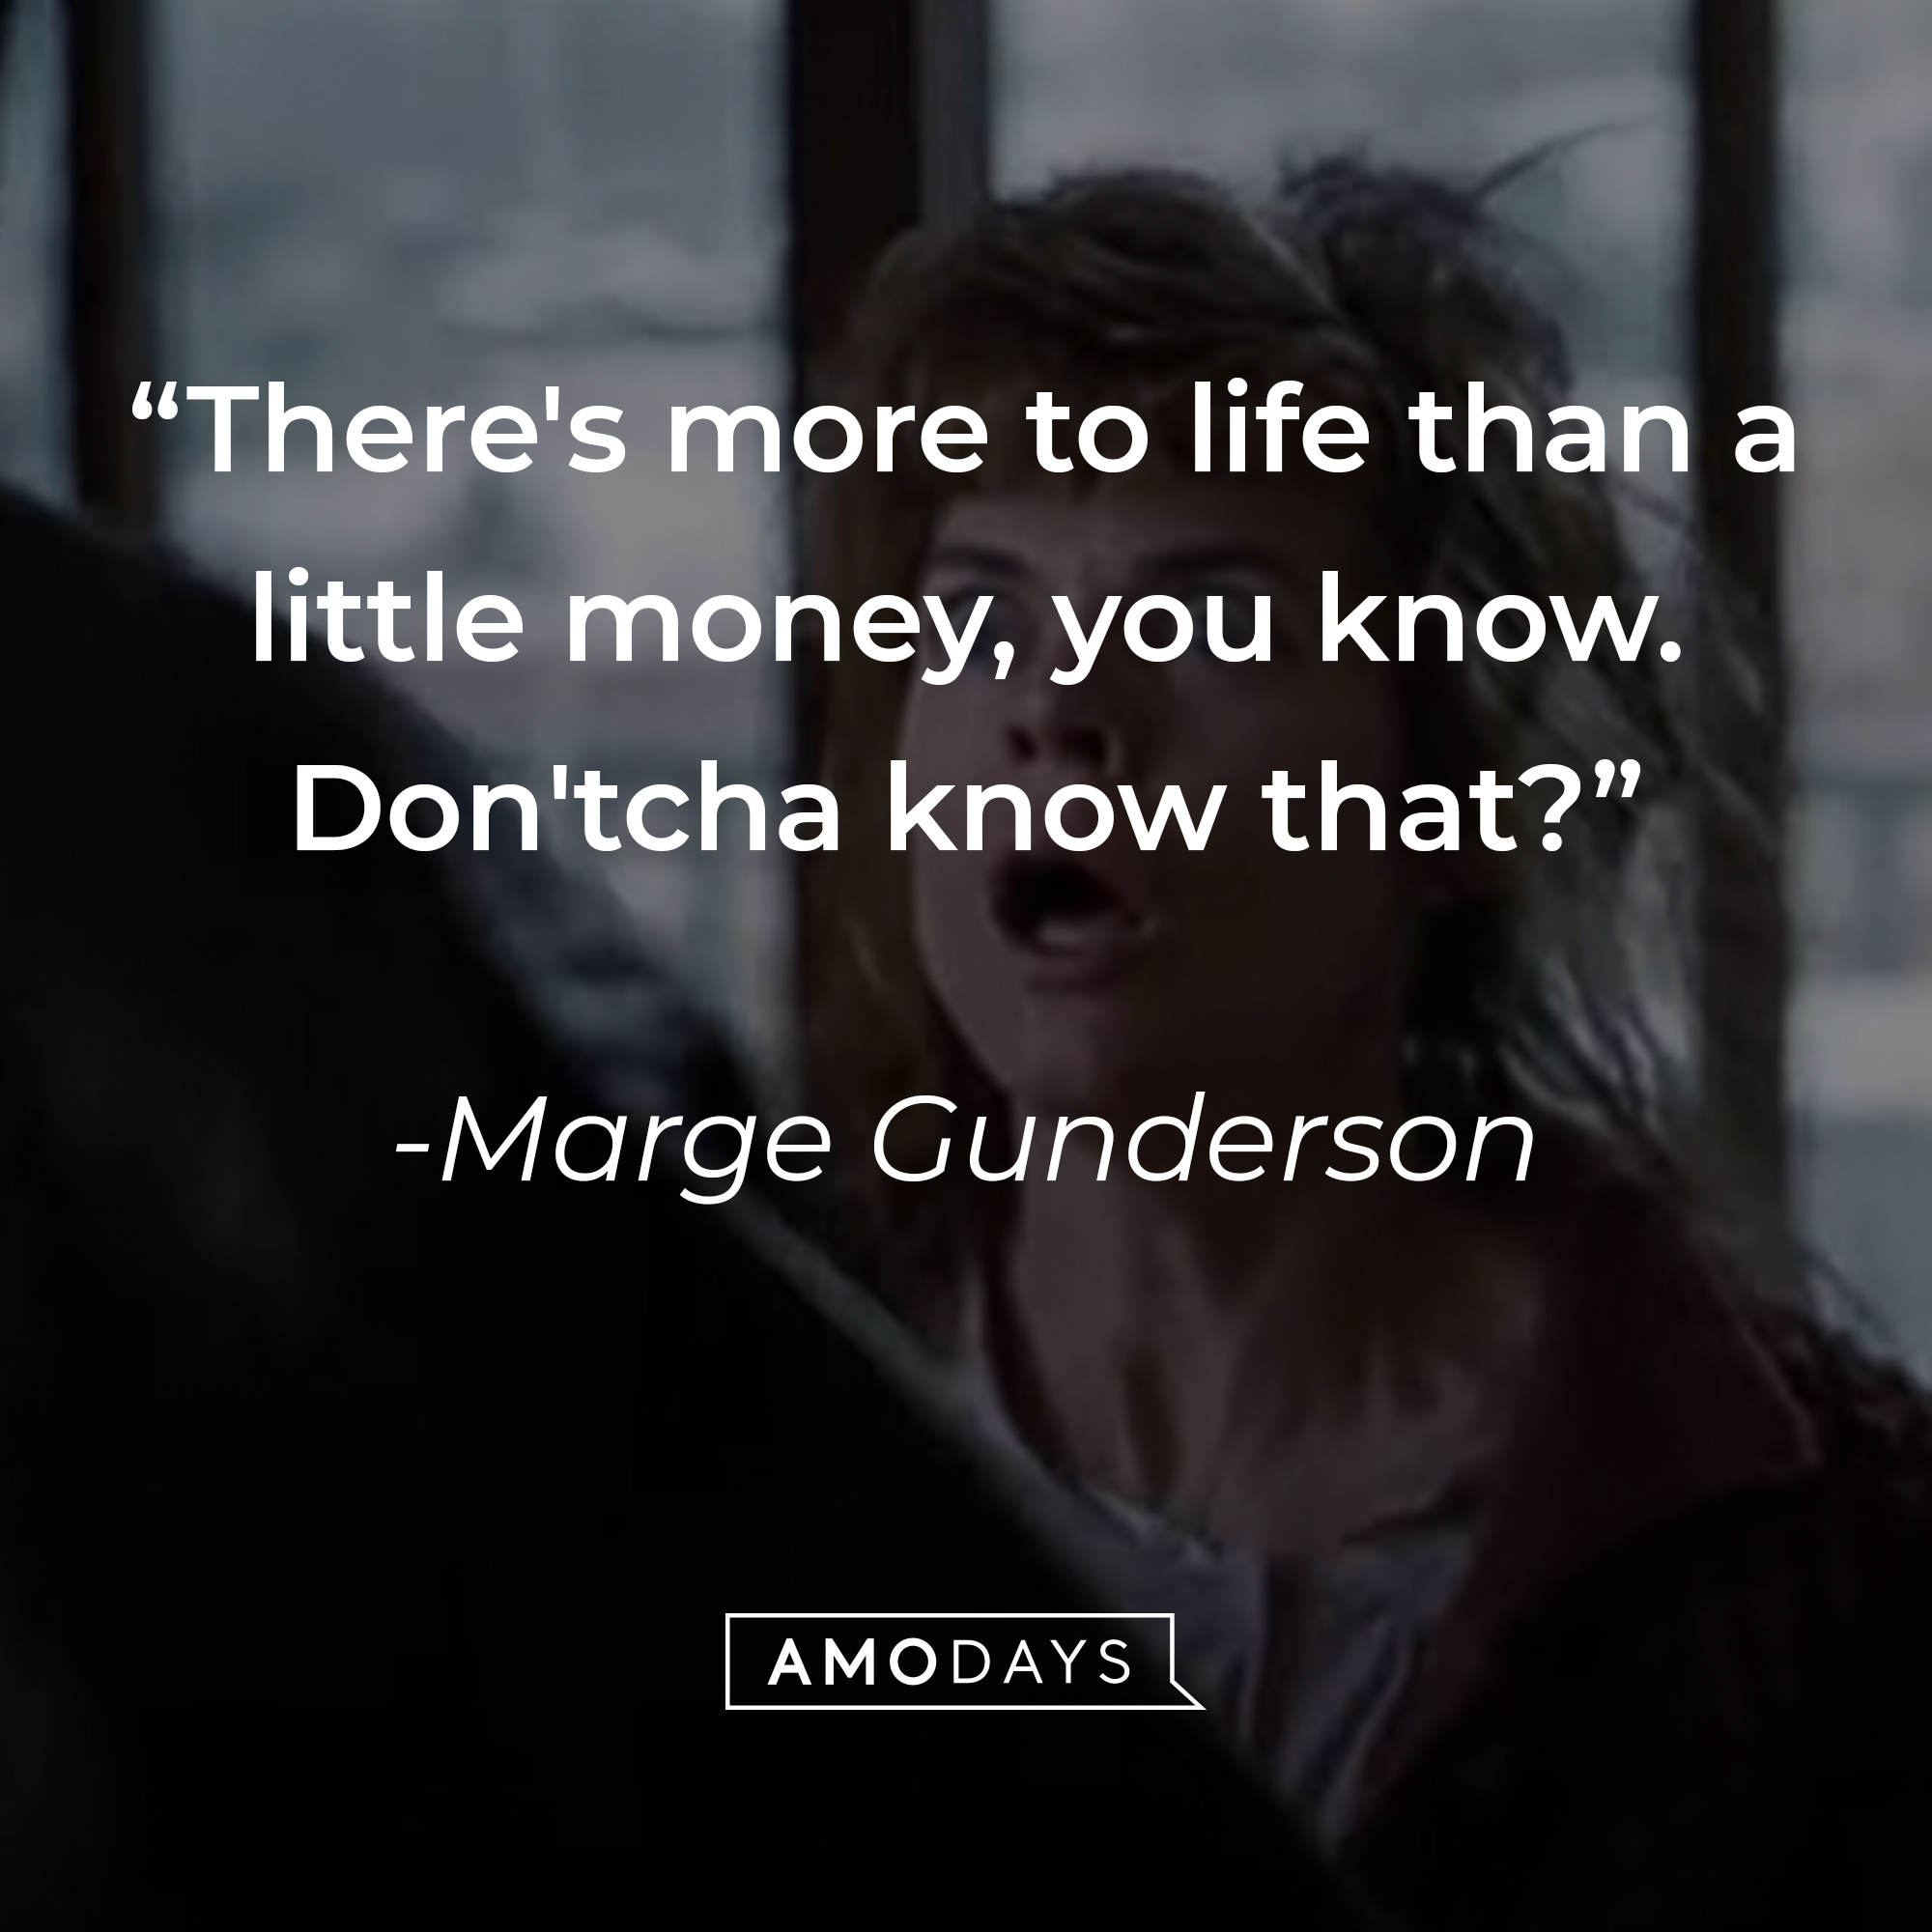 Marge Gunderson's quote: “There's more to life than a little money, you know. Don'tcha know that?" | Source: youtube.com/MGMStudios